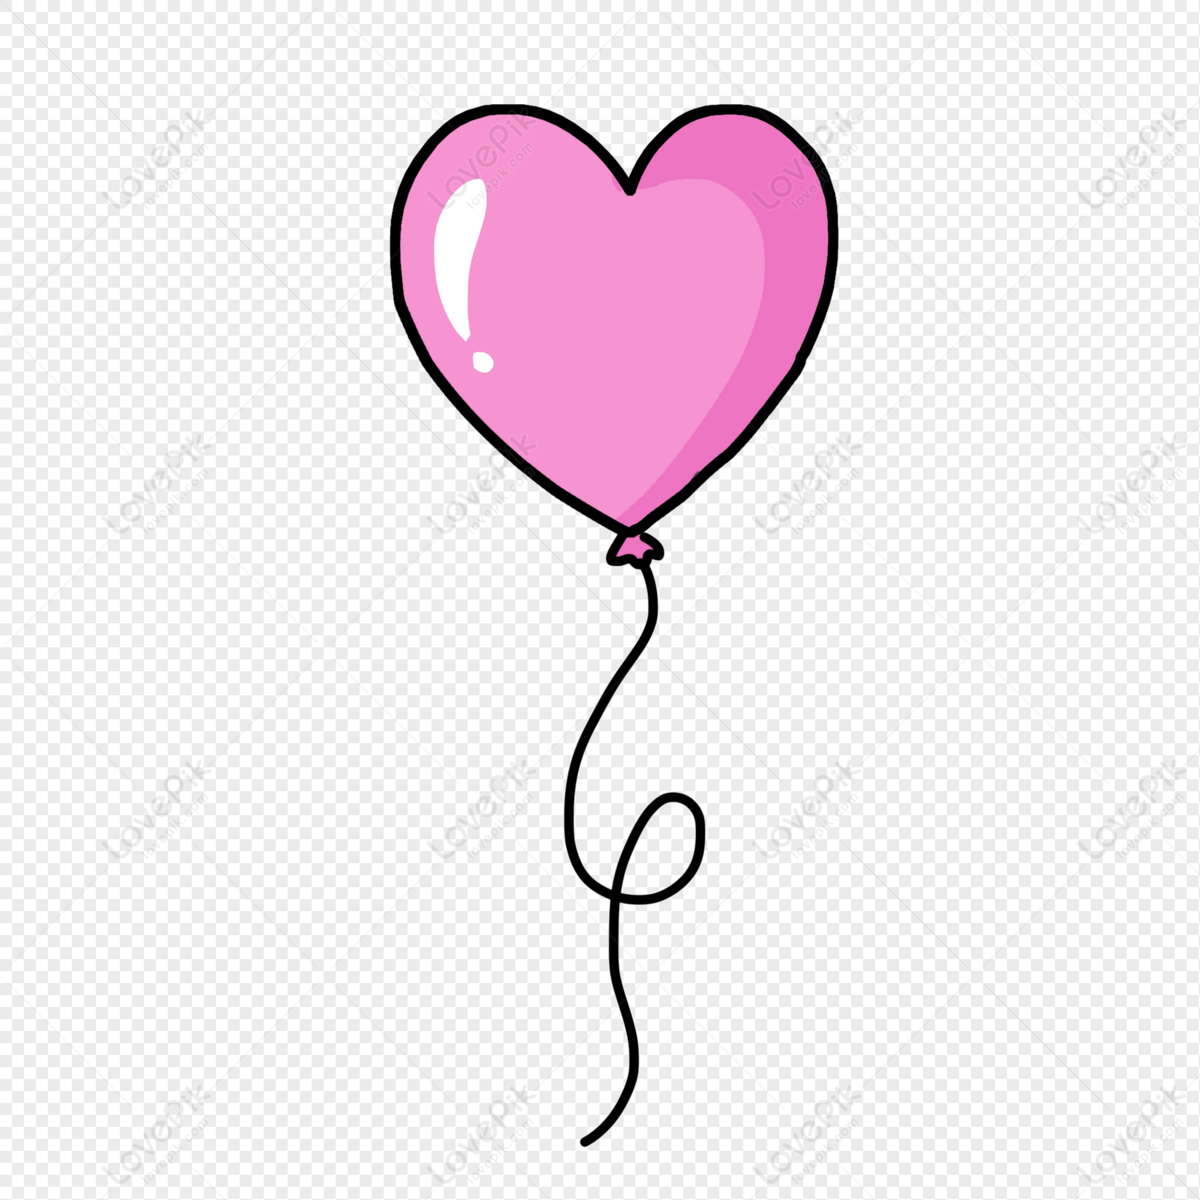 Love Balloon Cartoon PNG Image And Clipart Image For Free Download -  Lovepik | 401180838